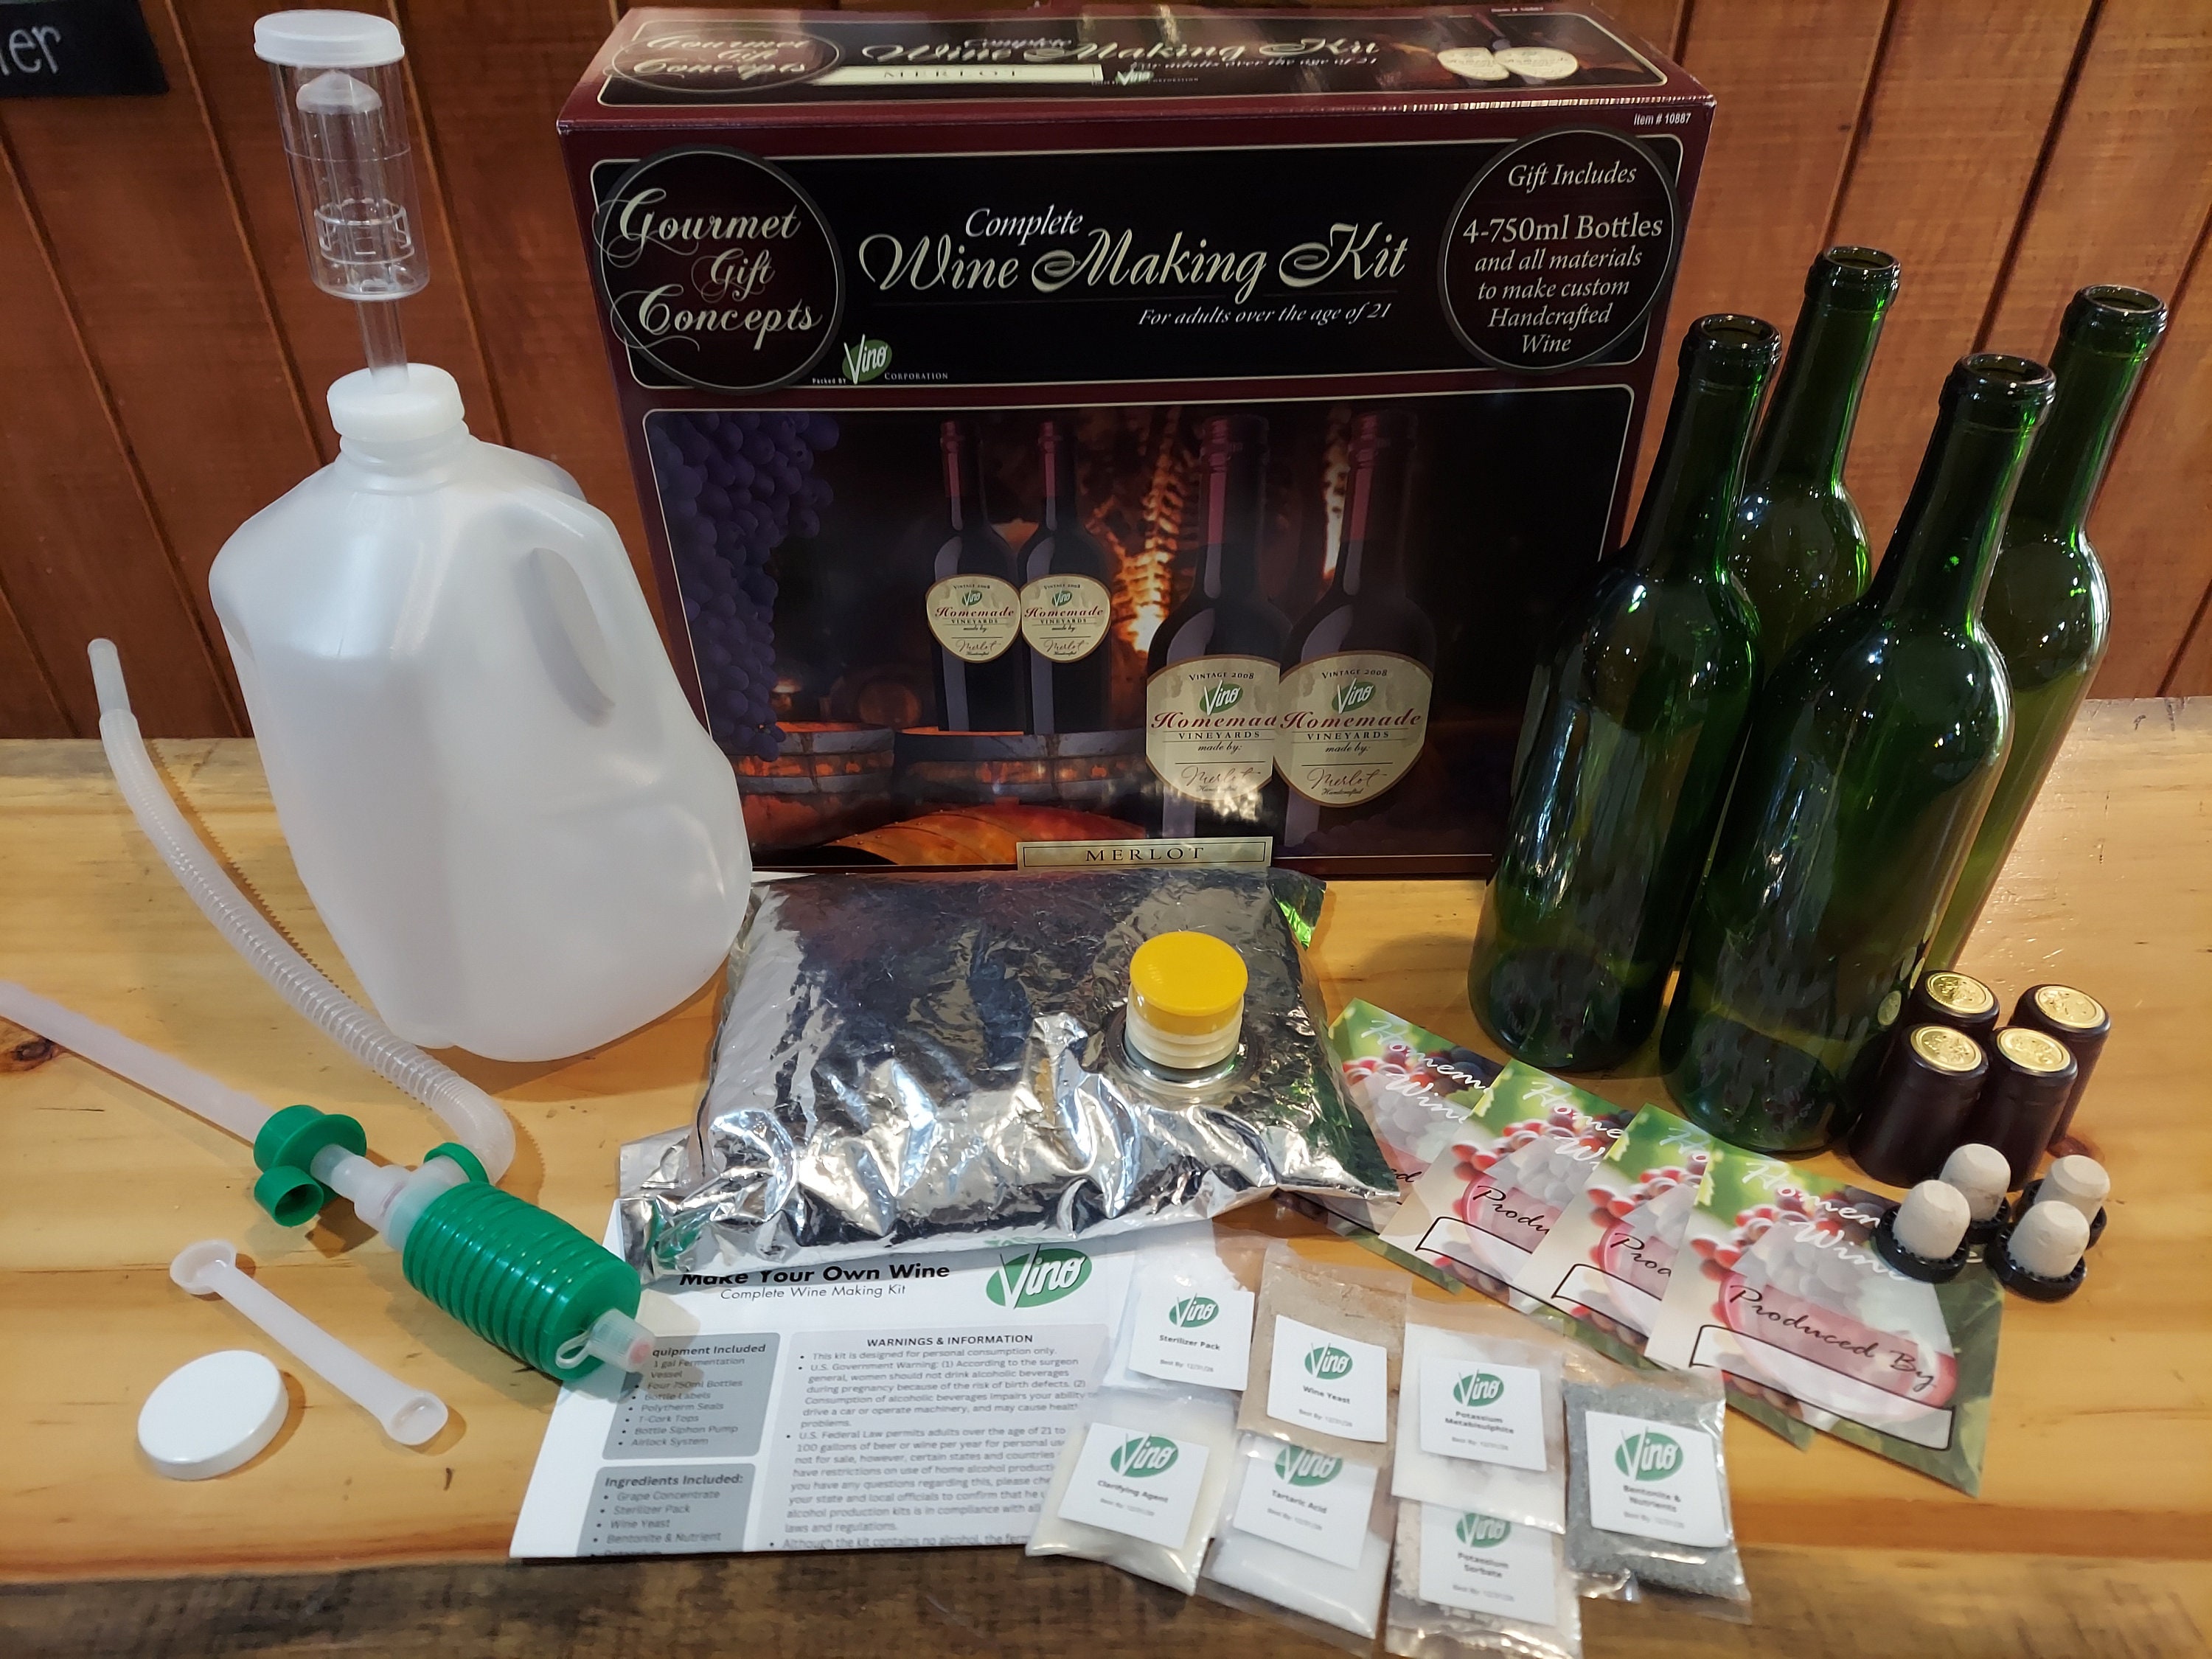 3 Gallon Mead Making Kit by Must Bee Company Make Your Own Mead 